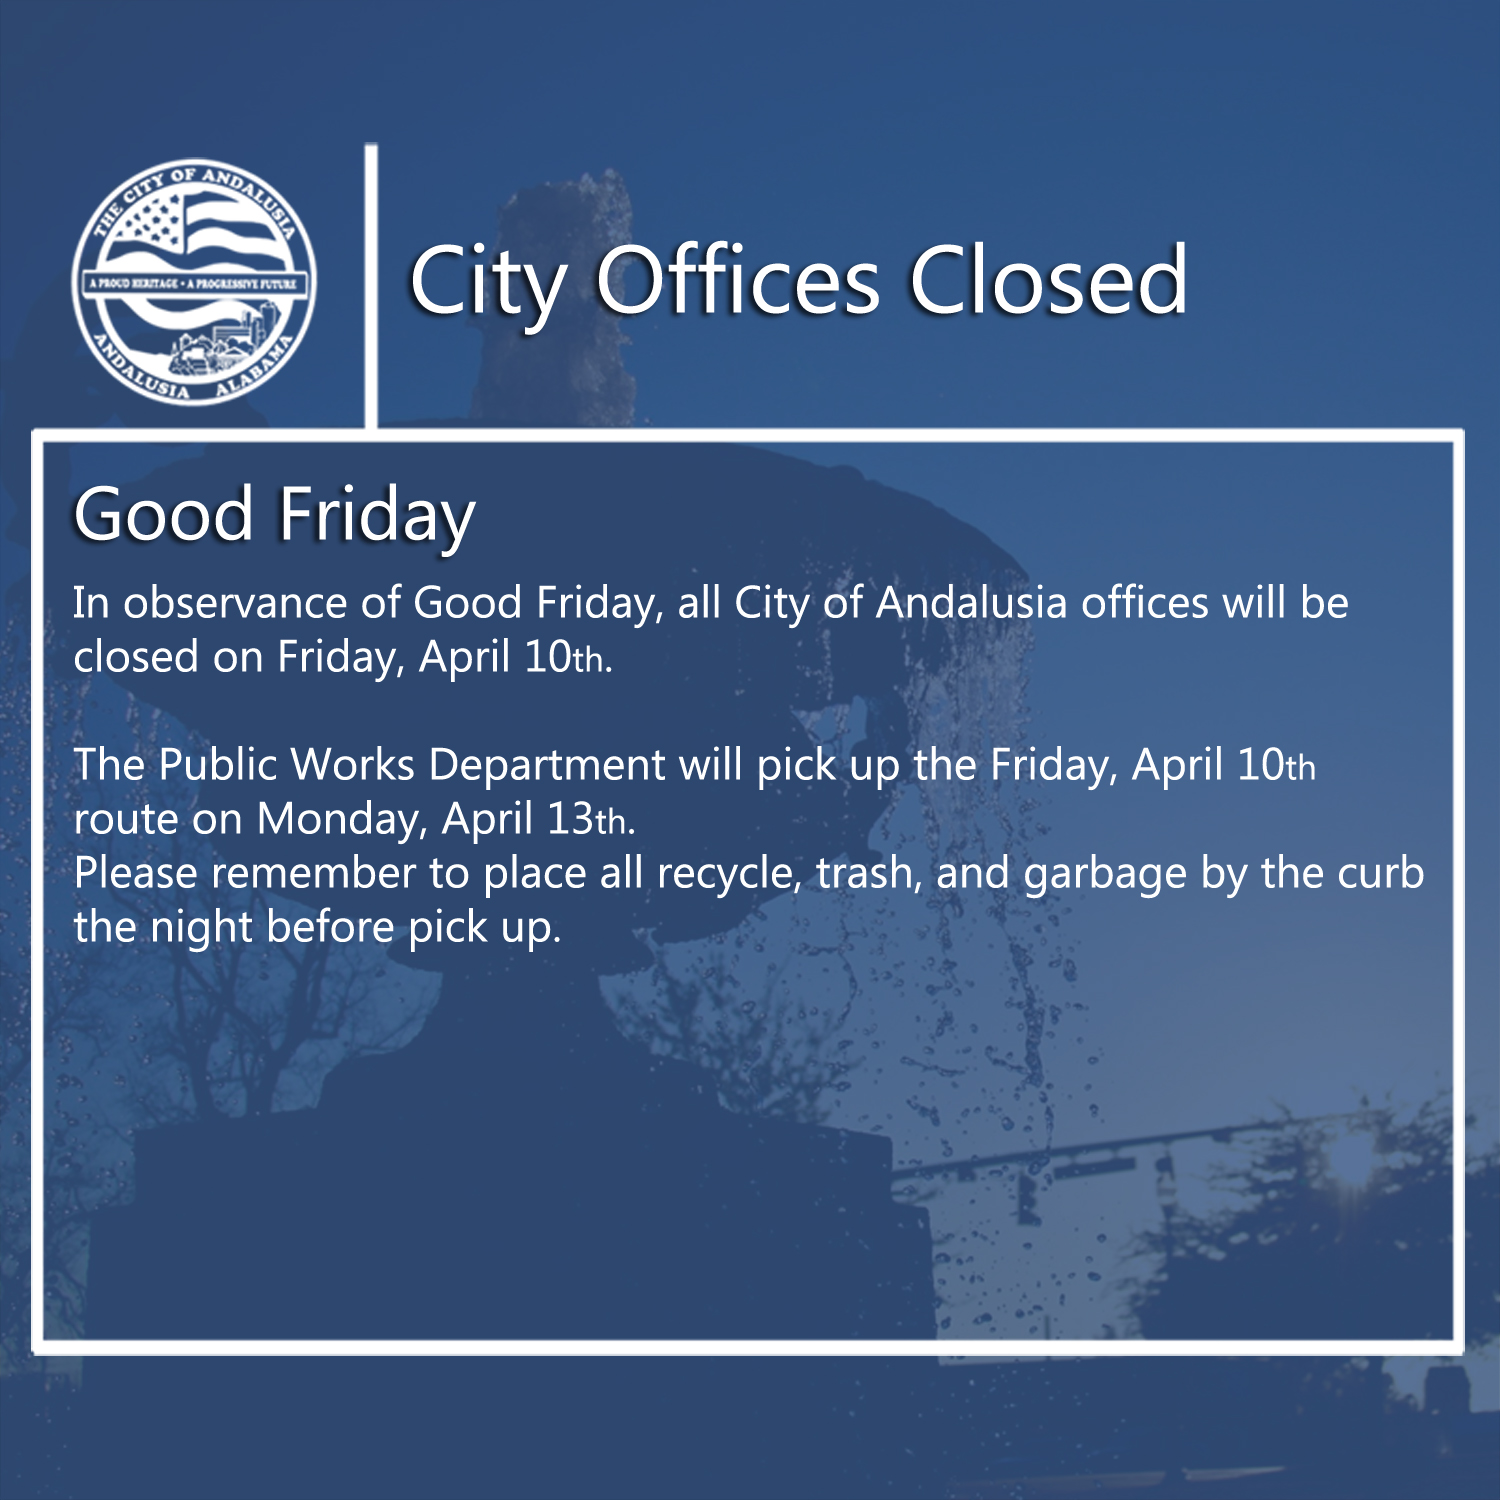 Facebook City Offices Closed April 10th